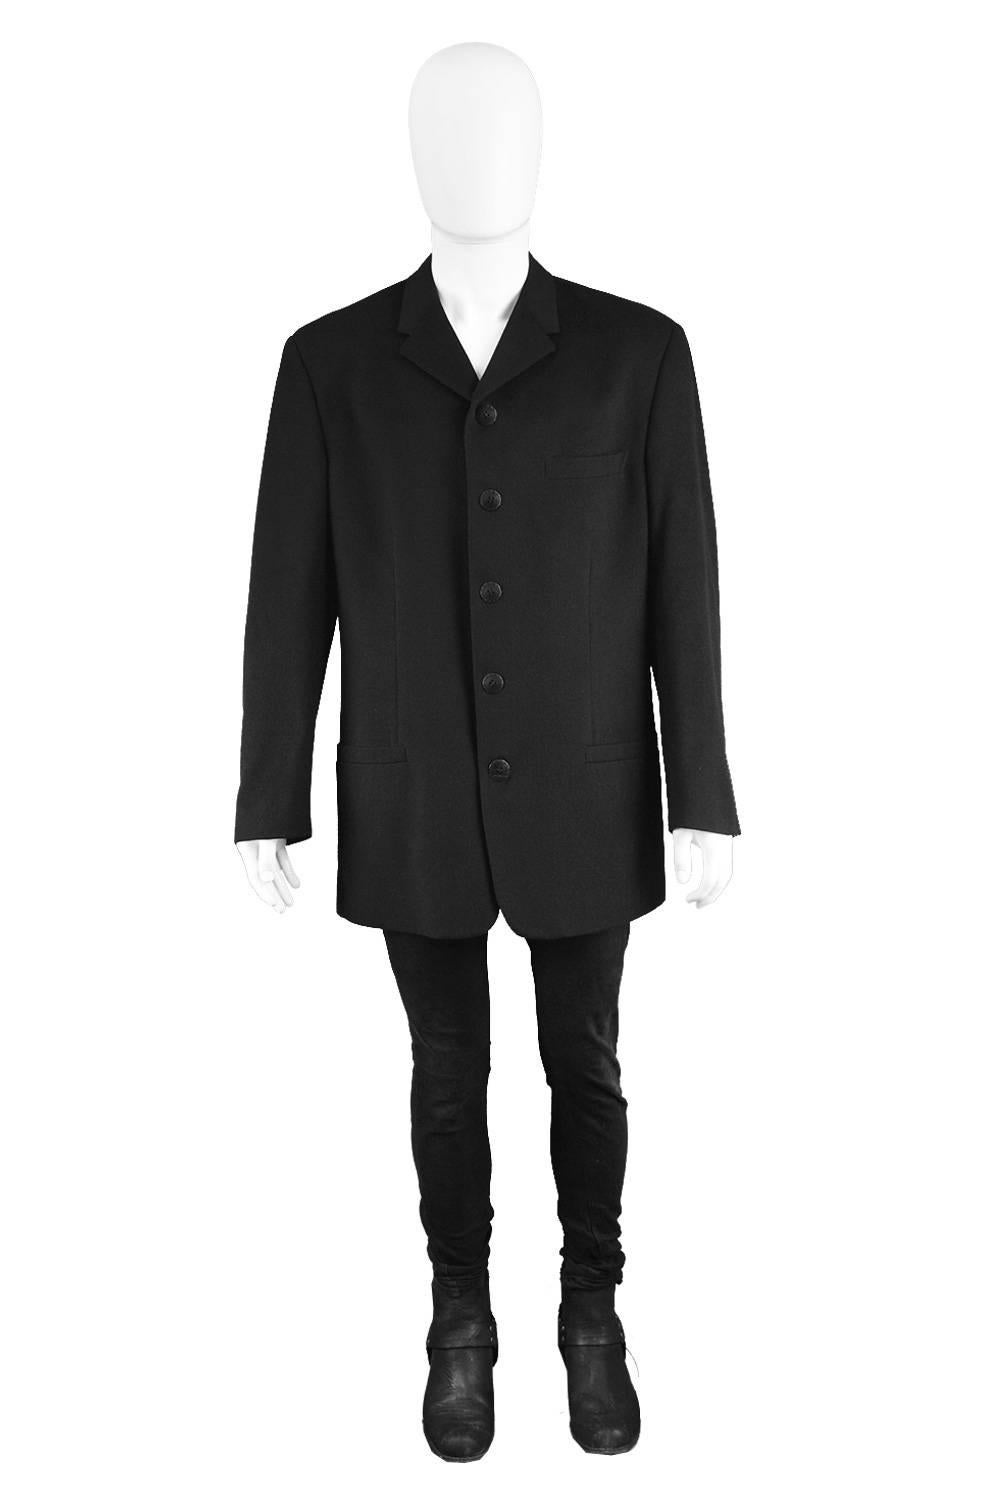 Gianni Versace Vintage 1990's Men's Vintage Black Wool Five Button Blazer Jacket

Size: Marked a IT 52 which is roughly a men's Large. Please check measurements. 
Chest - 44” / 112cm (allow a couple of inches room for movement)
Length (Shoulder to